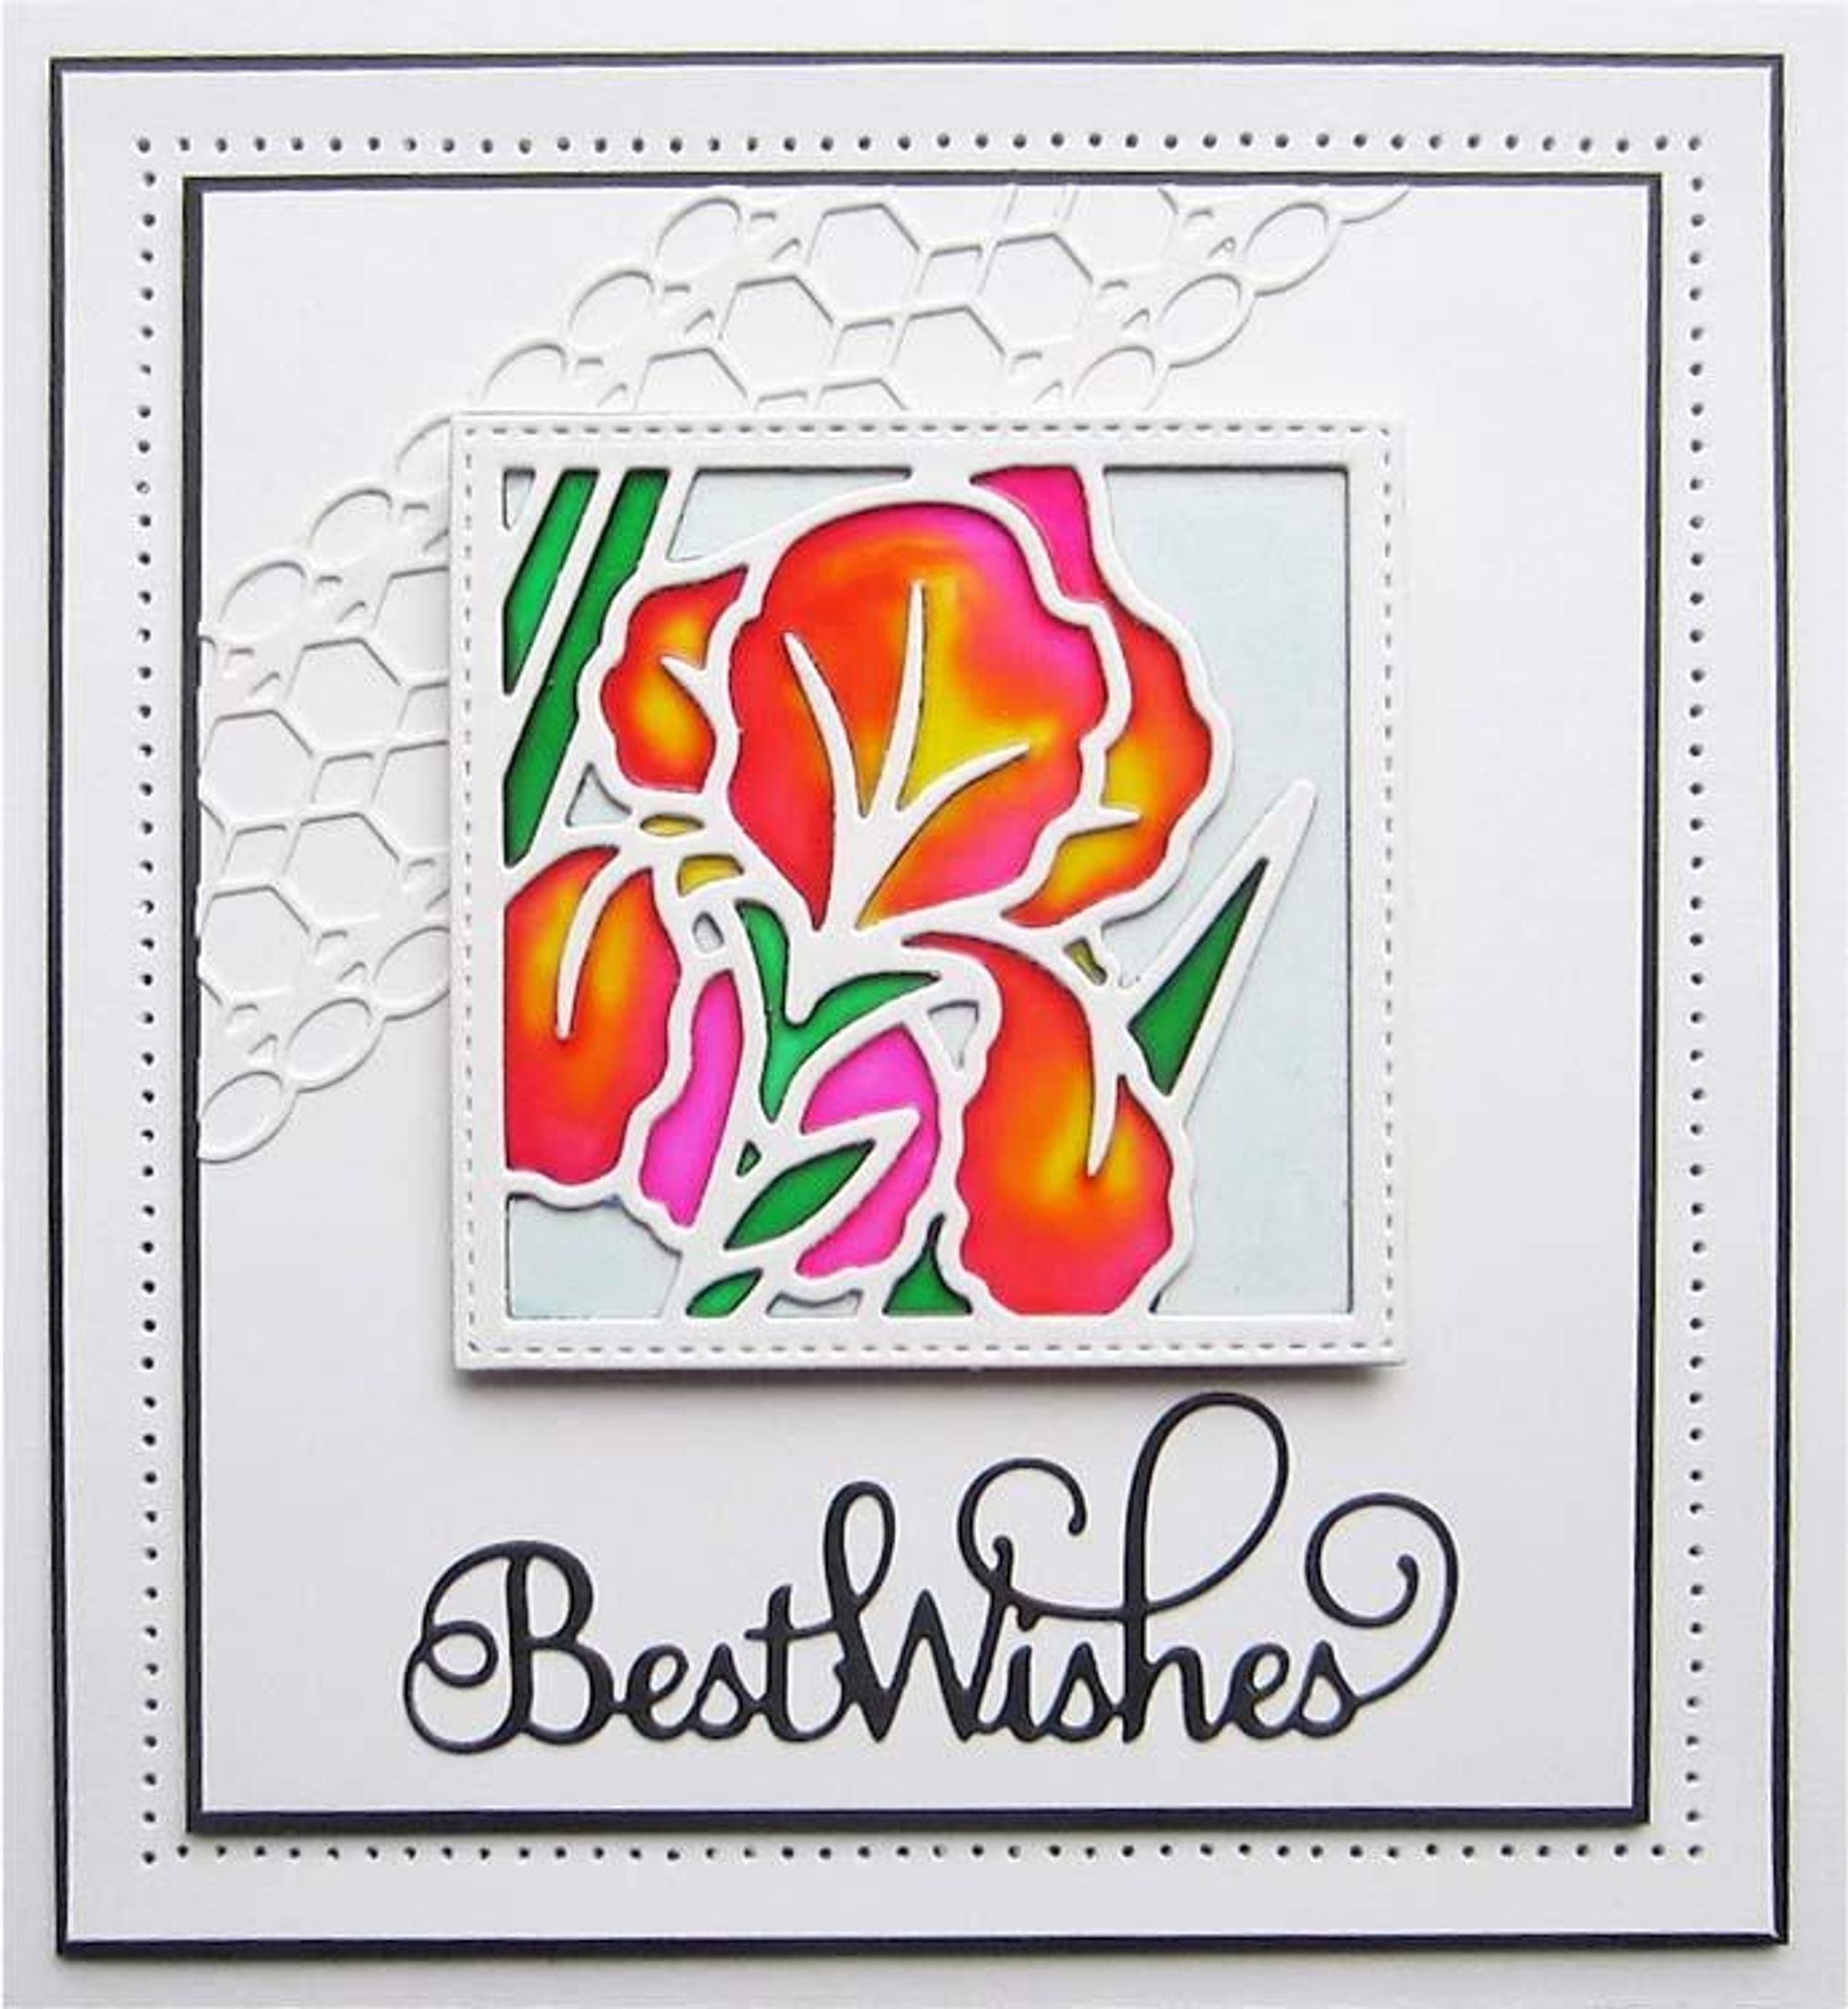 Creative Expressions Mini Expressions Best Wishes